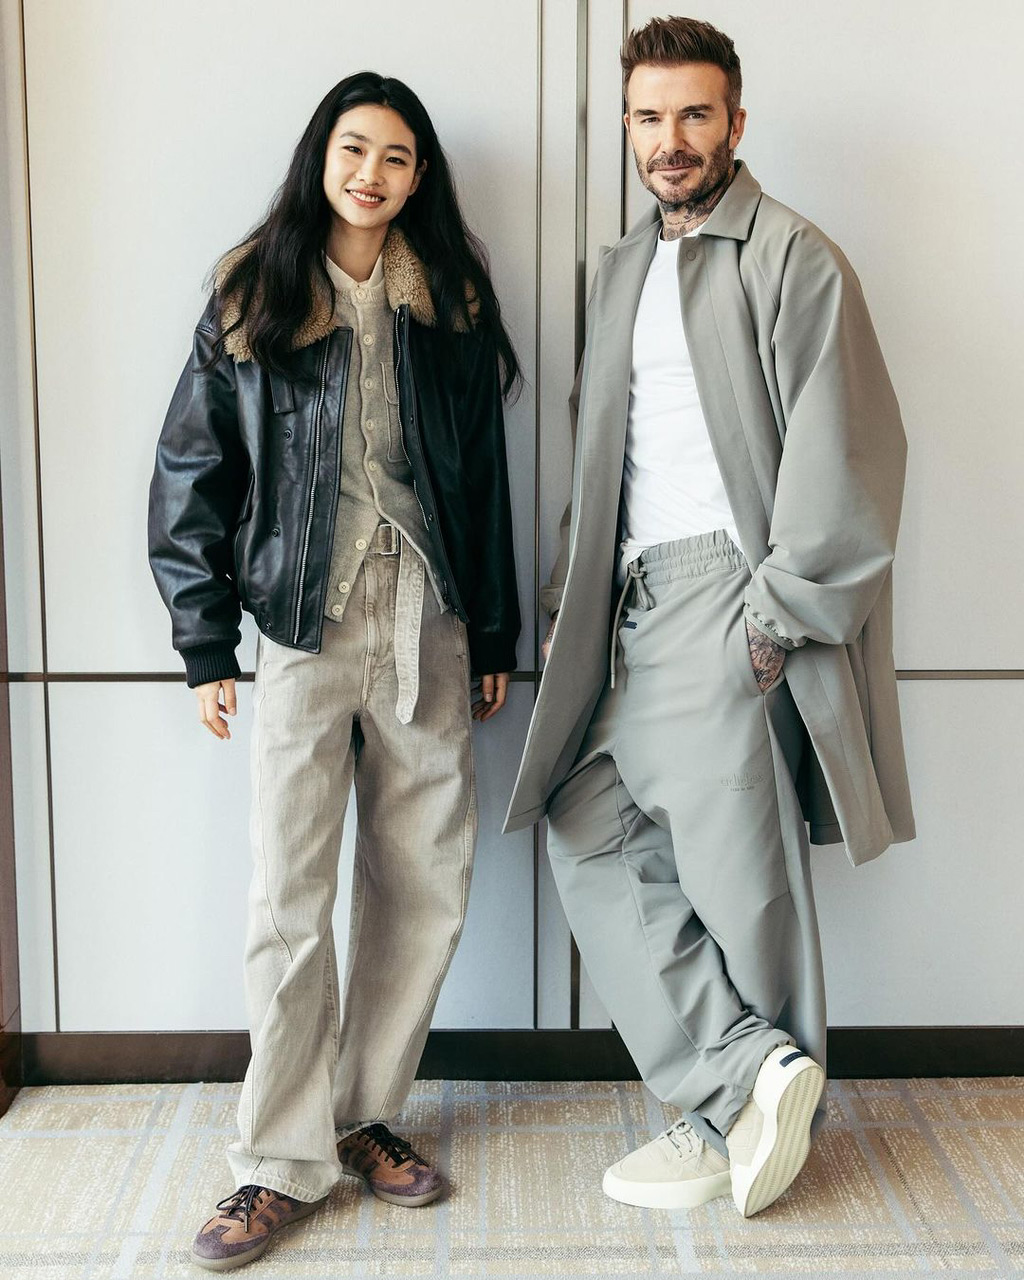 Jung Ho-yeon and Beckham